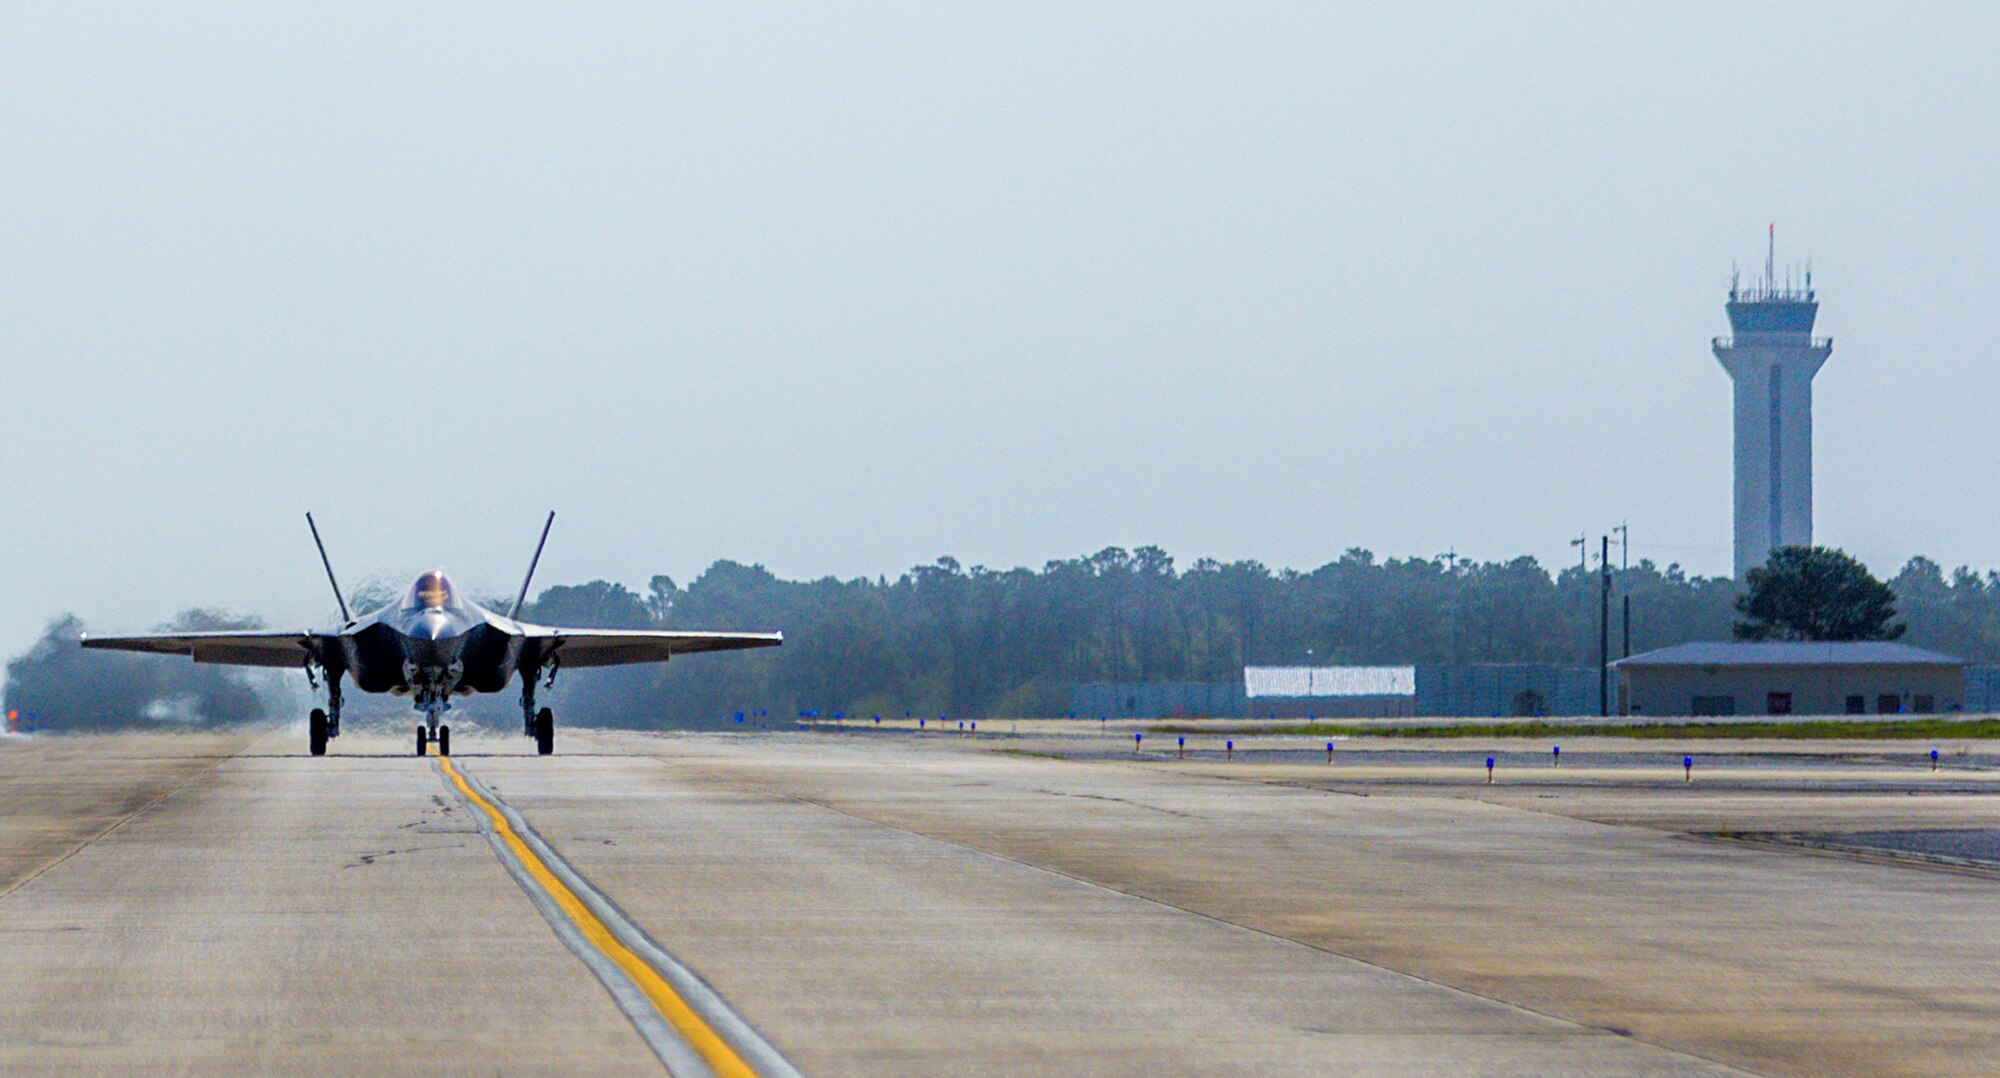 An F-35C Lightning II taxis down the flight line Feb. 27 from the Strike Fighter Squadron 101 at Eglin Air Force Base, Fla. The F-35C variant is a carrier-capable low-observable multi-role fighter aircraft, designed to provide unmatched airborne power projection from the sea. The Navy's joint strike fighter bears structural modifications from the other variants, necessitated by the increased resiliency required for carrier operations. (U.S. Air Force photo/Kristin Stewart)